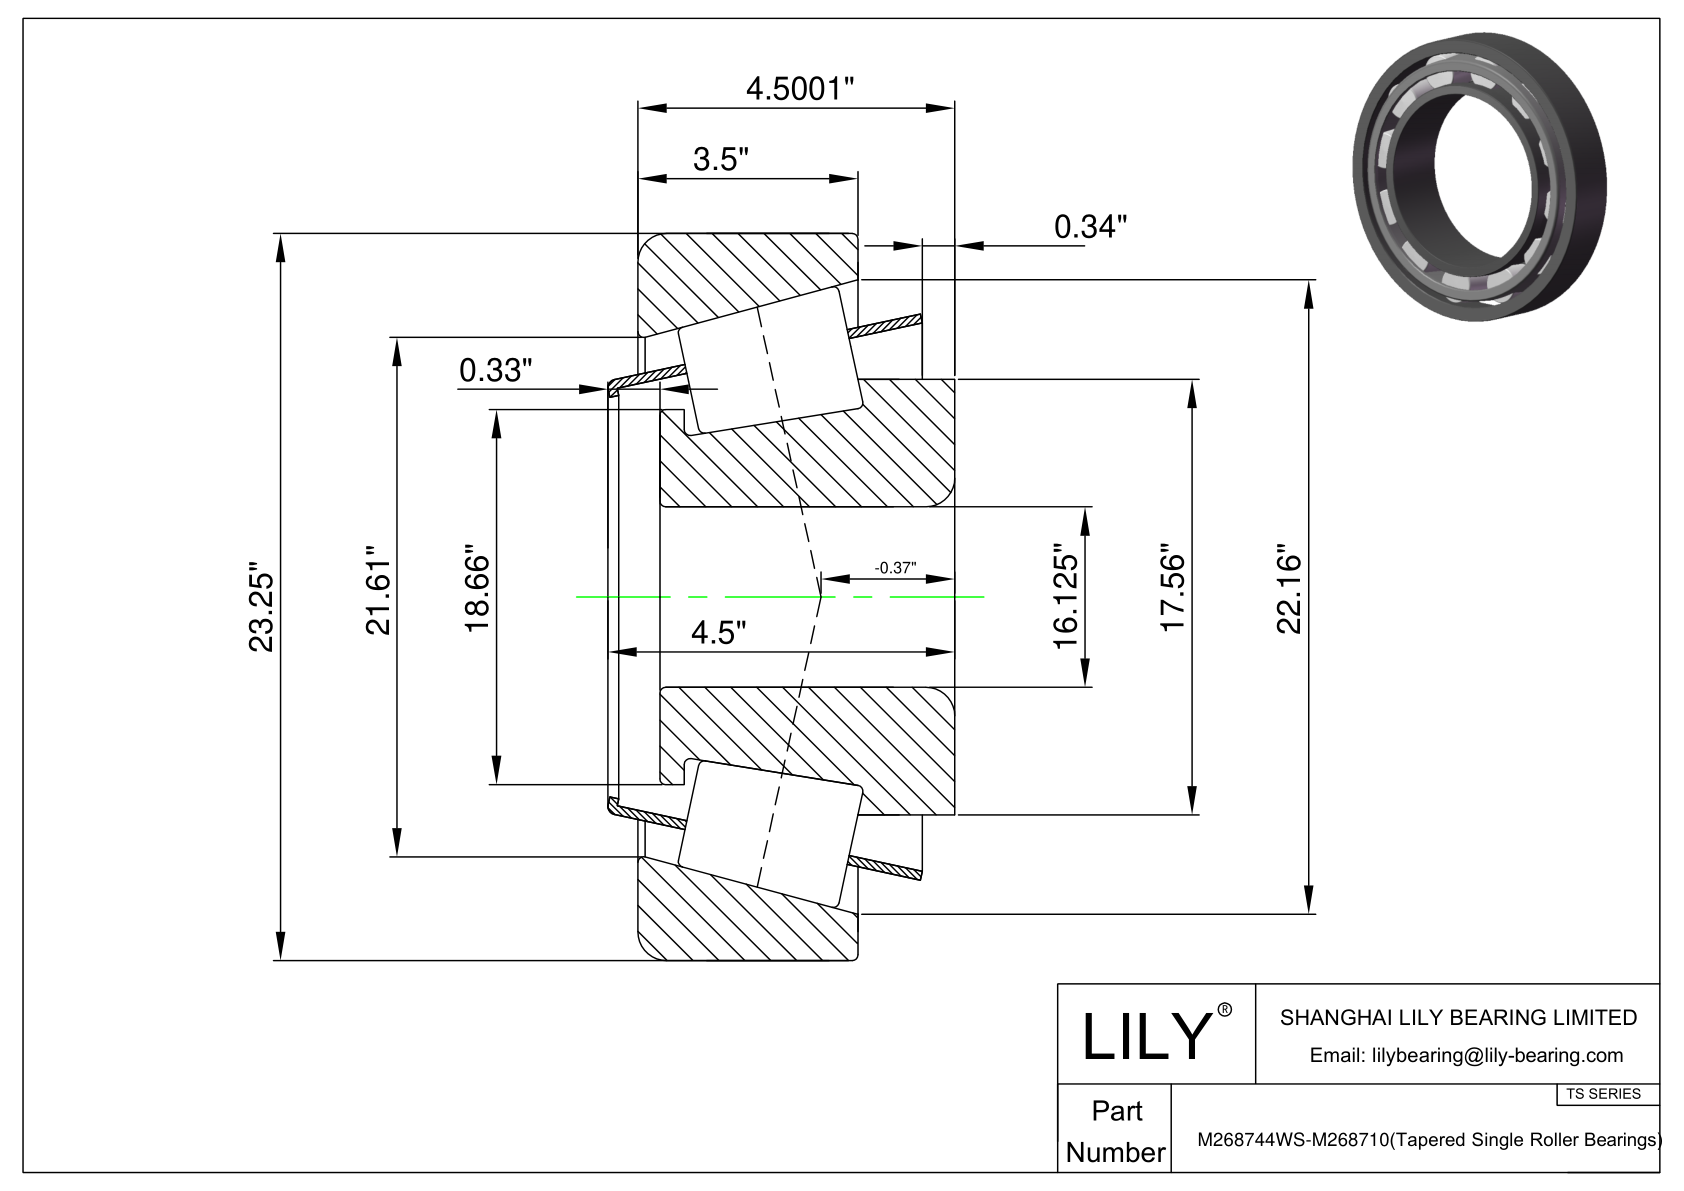 M268744WS-M268710 TS (Tapered Single Roller Bearings) (Imperial) cad drawing